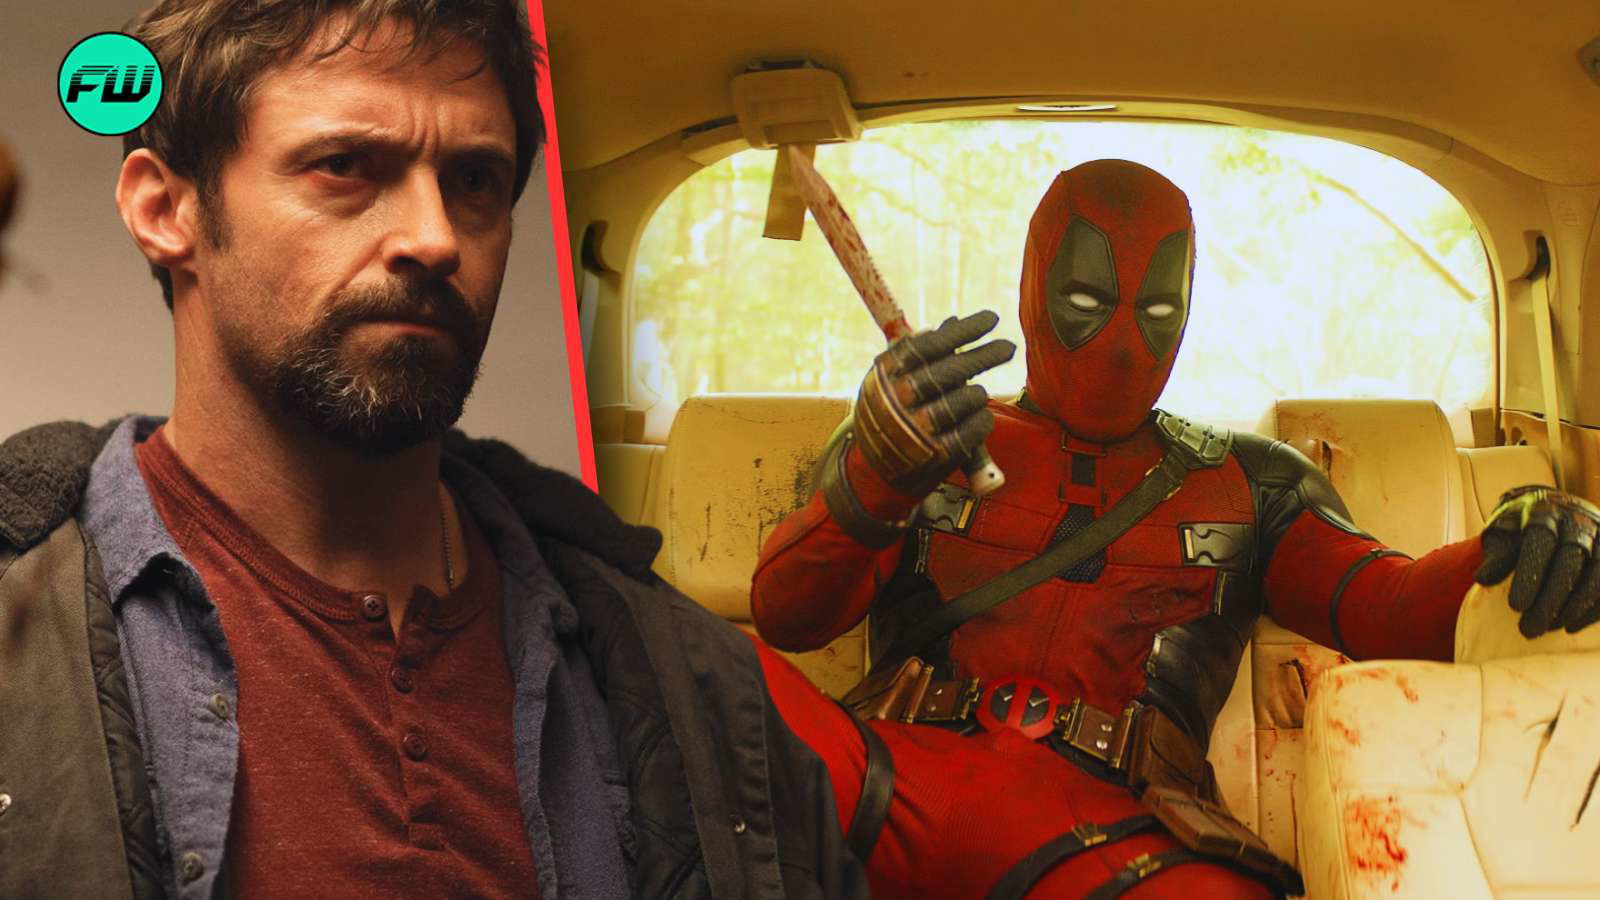 Hugh Jackman from Prisoners and Deadpool